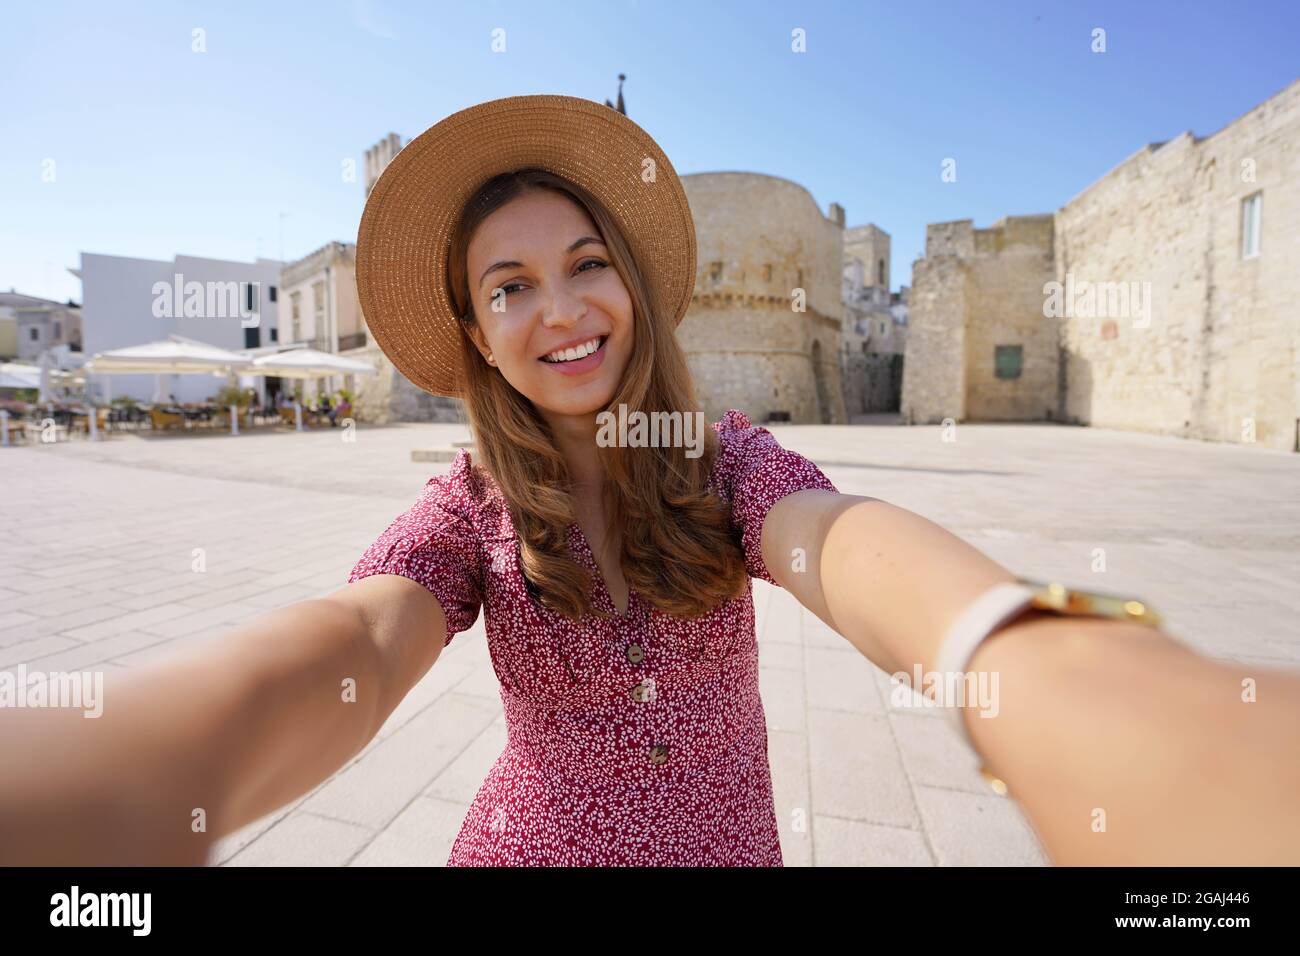 Proximity tourism concept. Smiling woman taking self portrait in Apulia with the old town of Otranto on the backgorund, Italy Stock Photo